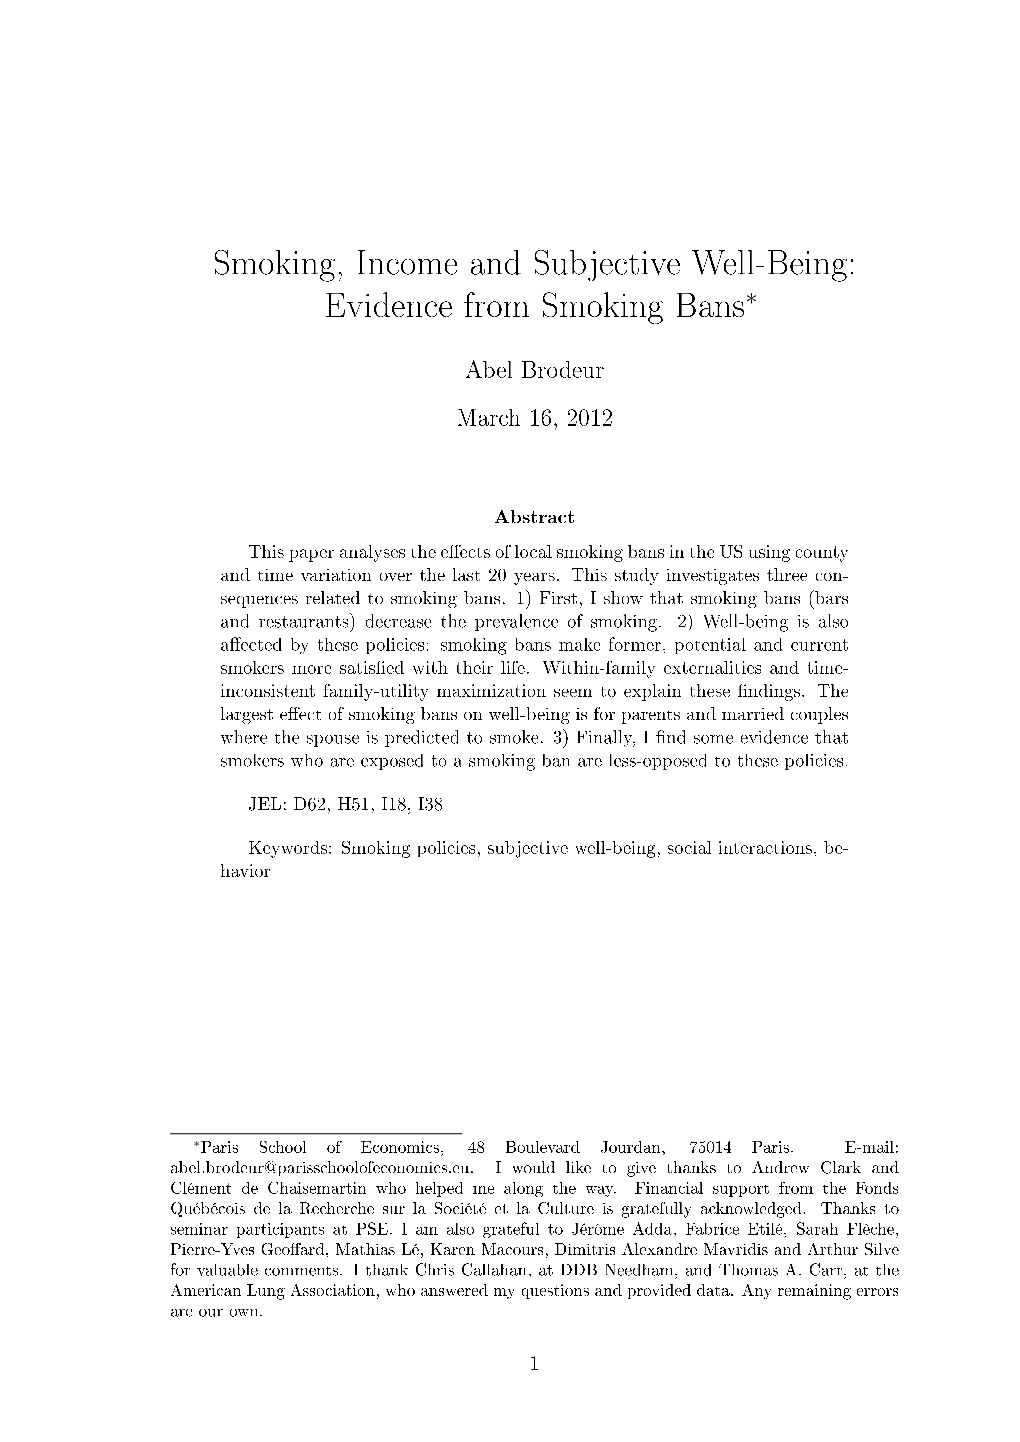 Smoking, Income and Subjective Well-Being: Evidence from Smoking Bans∗